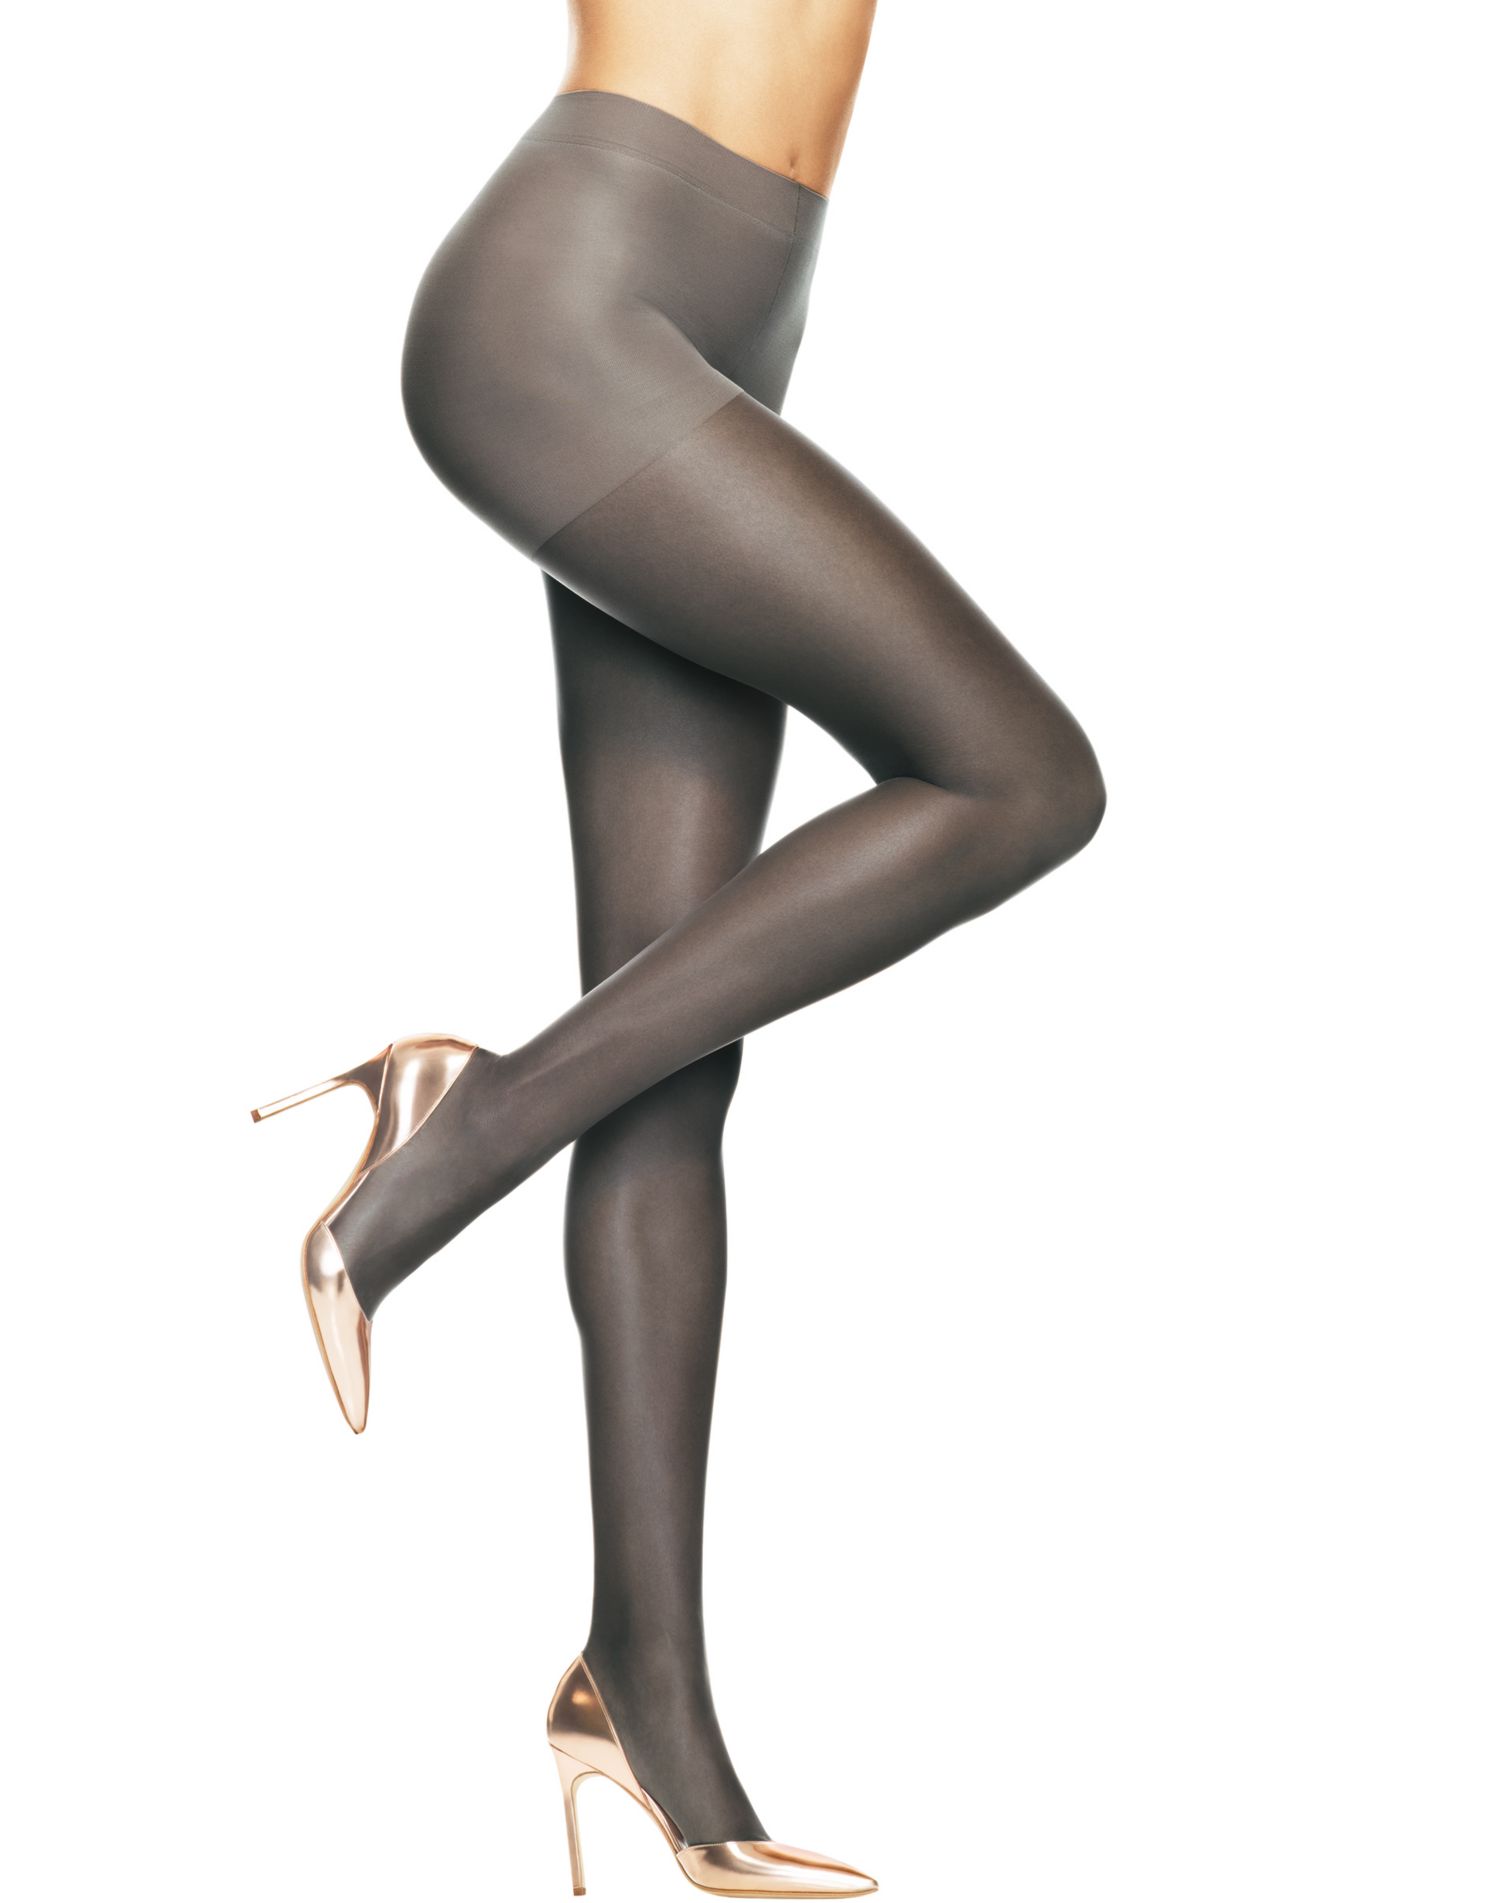 Hanes Absolutely Ultra Sheer Reinforced Toe Pantyhose